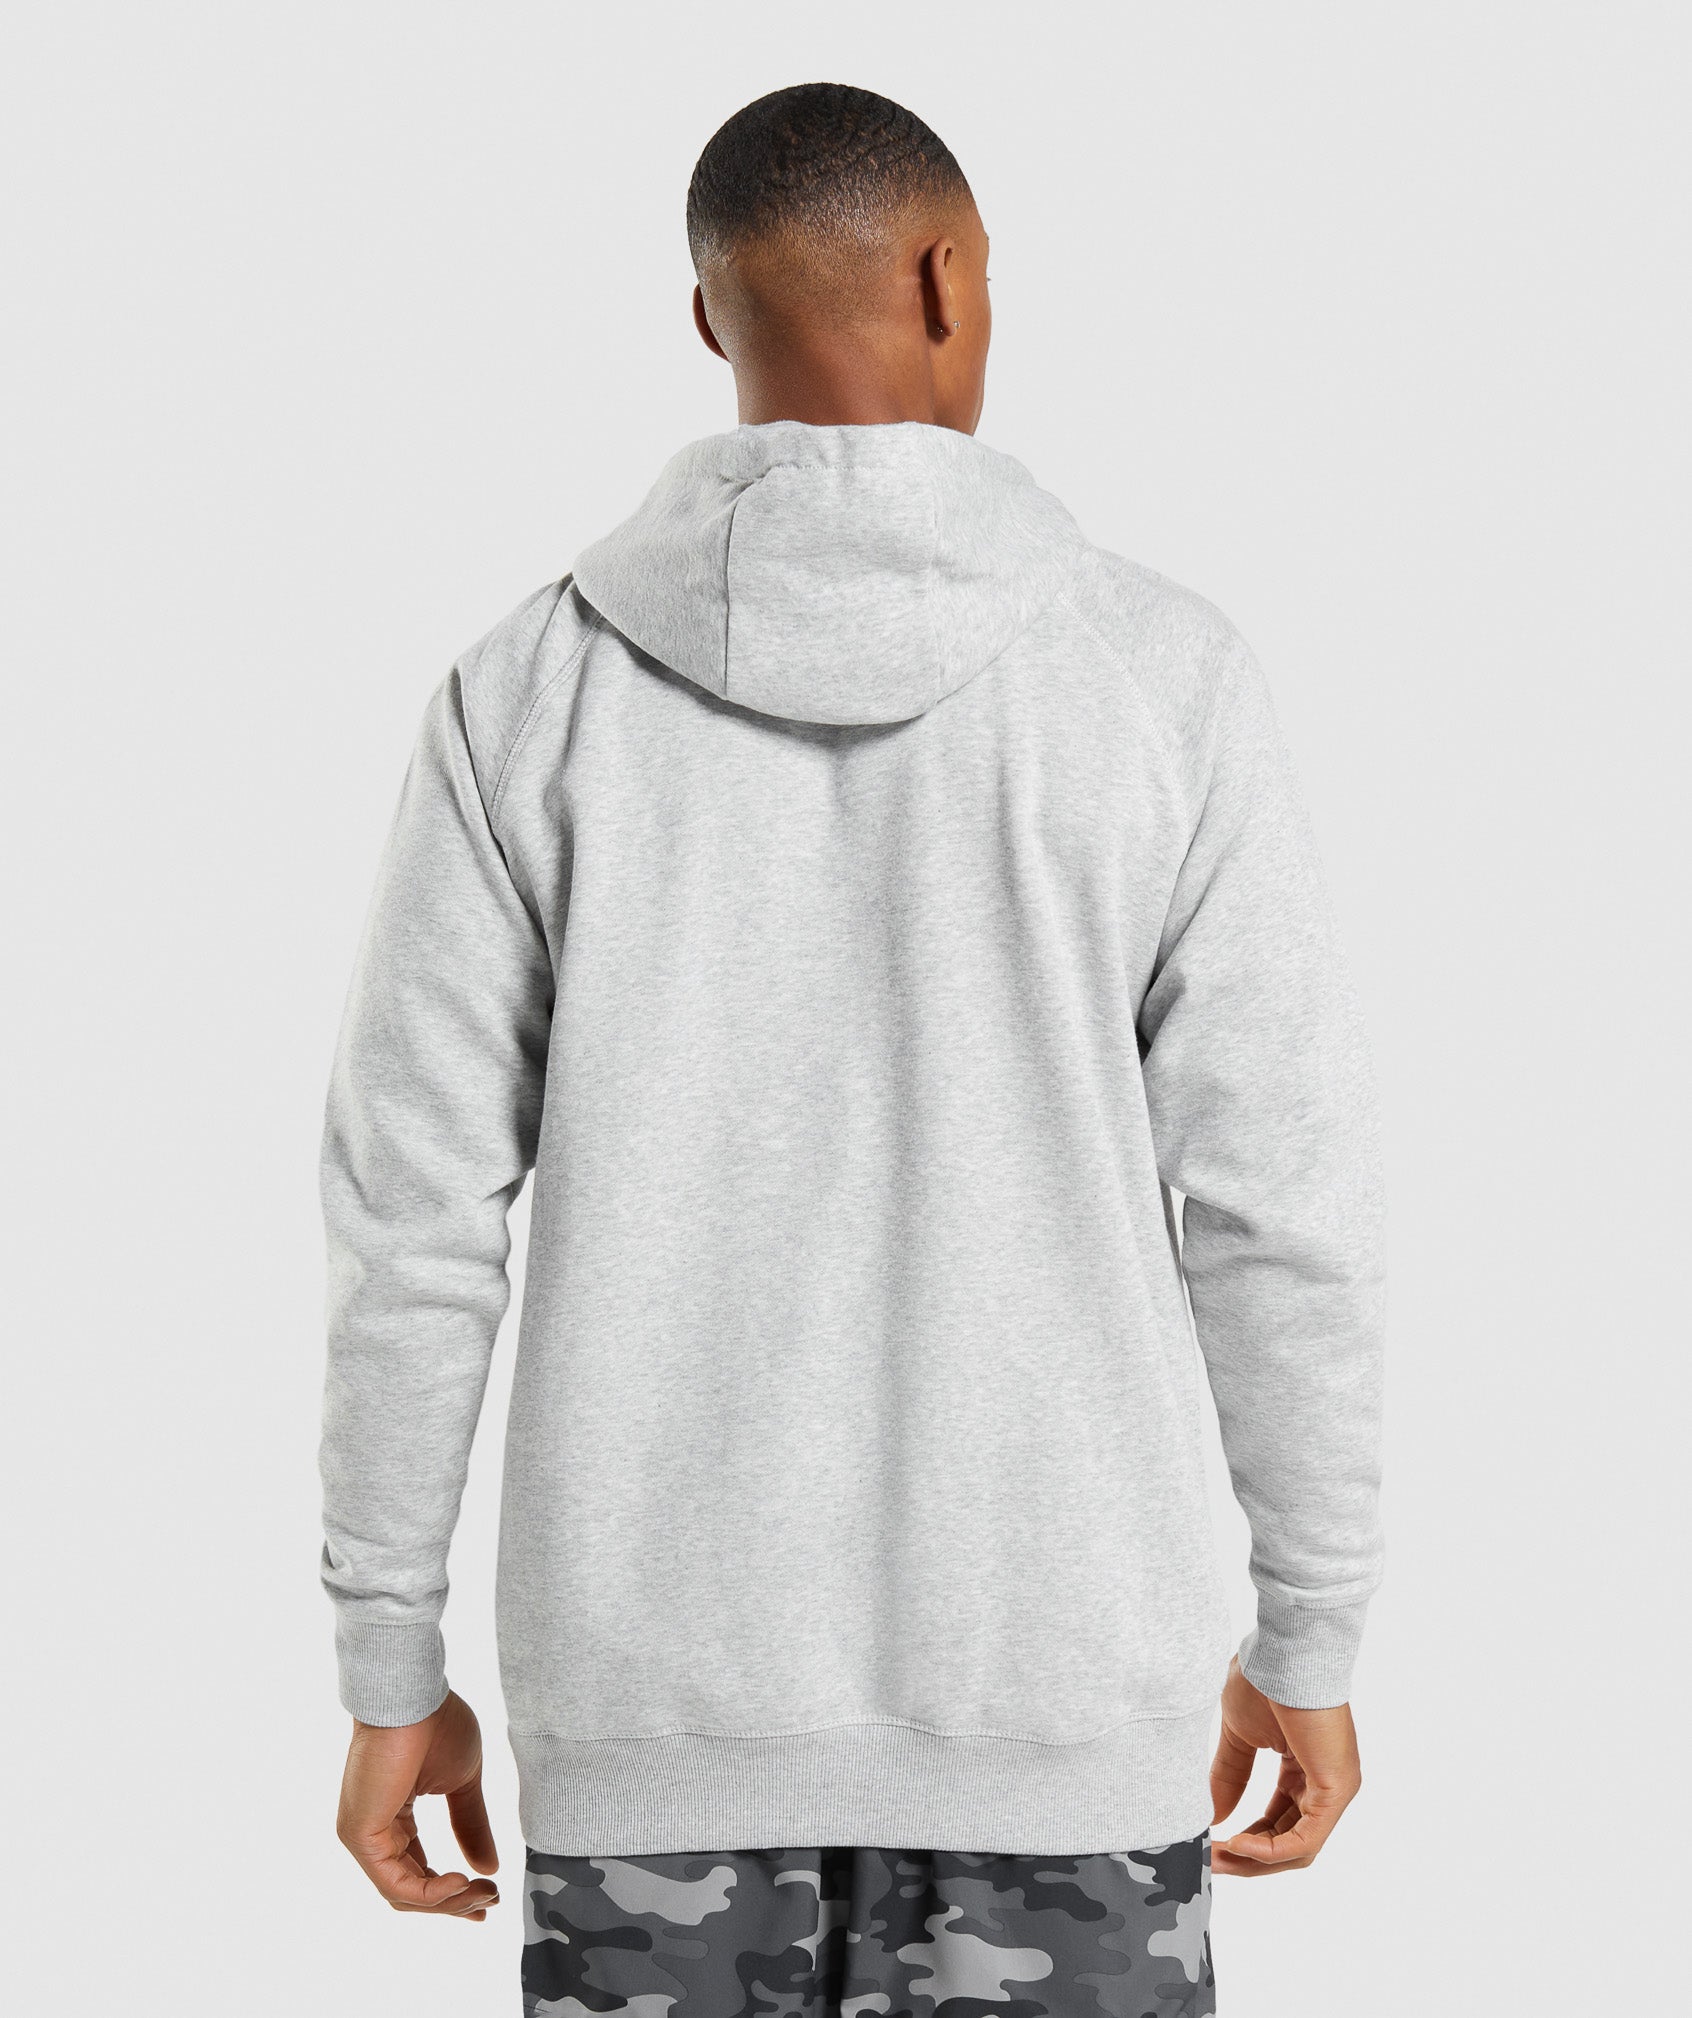 Apollo Hoodie in Light Grey Core Marl - view 2